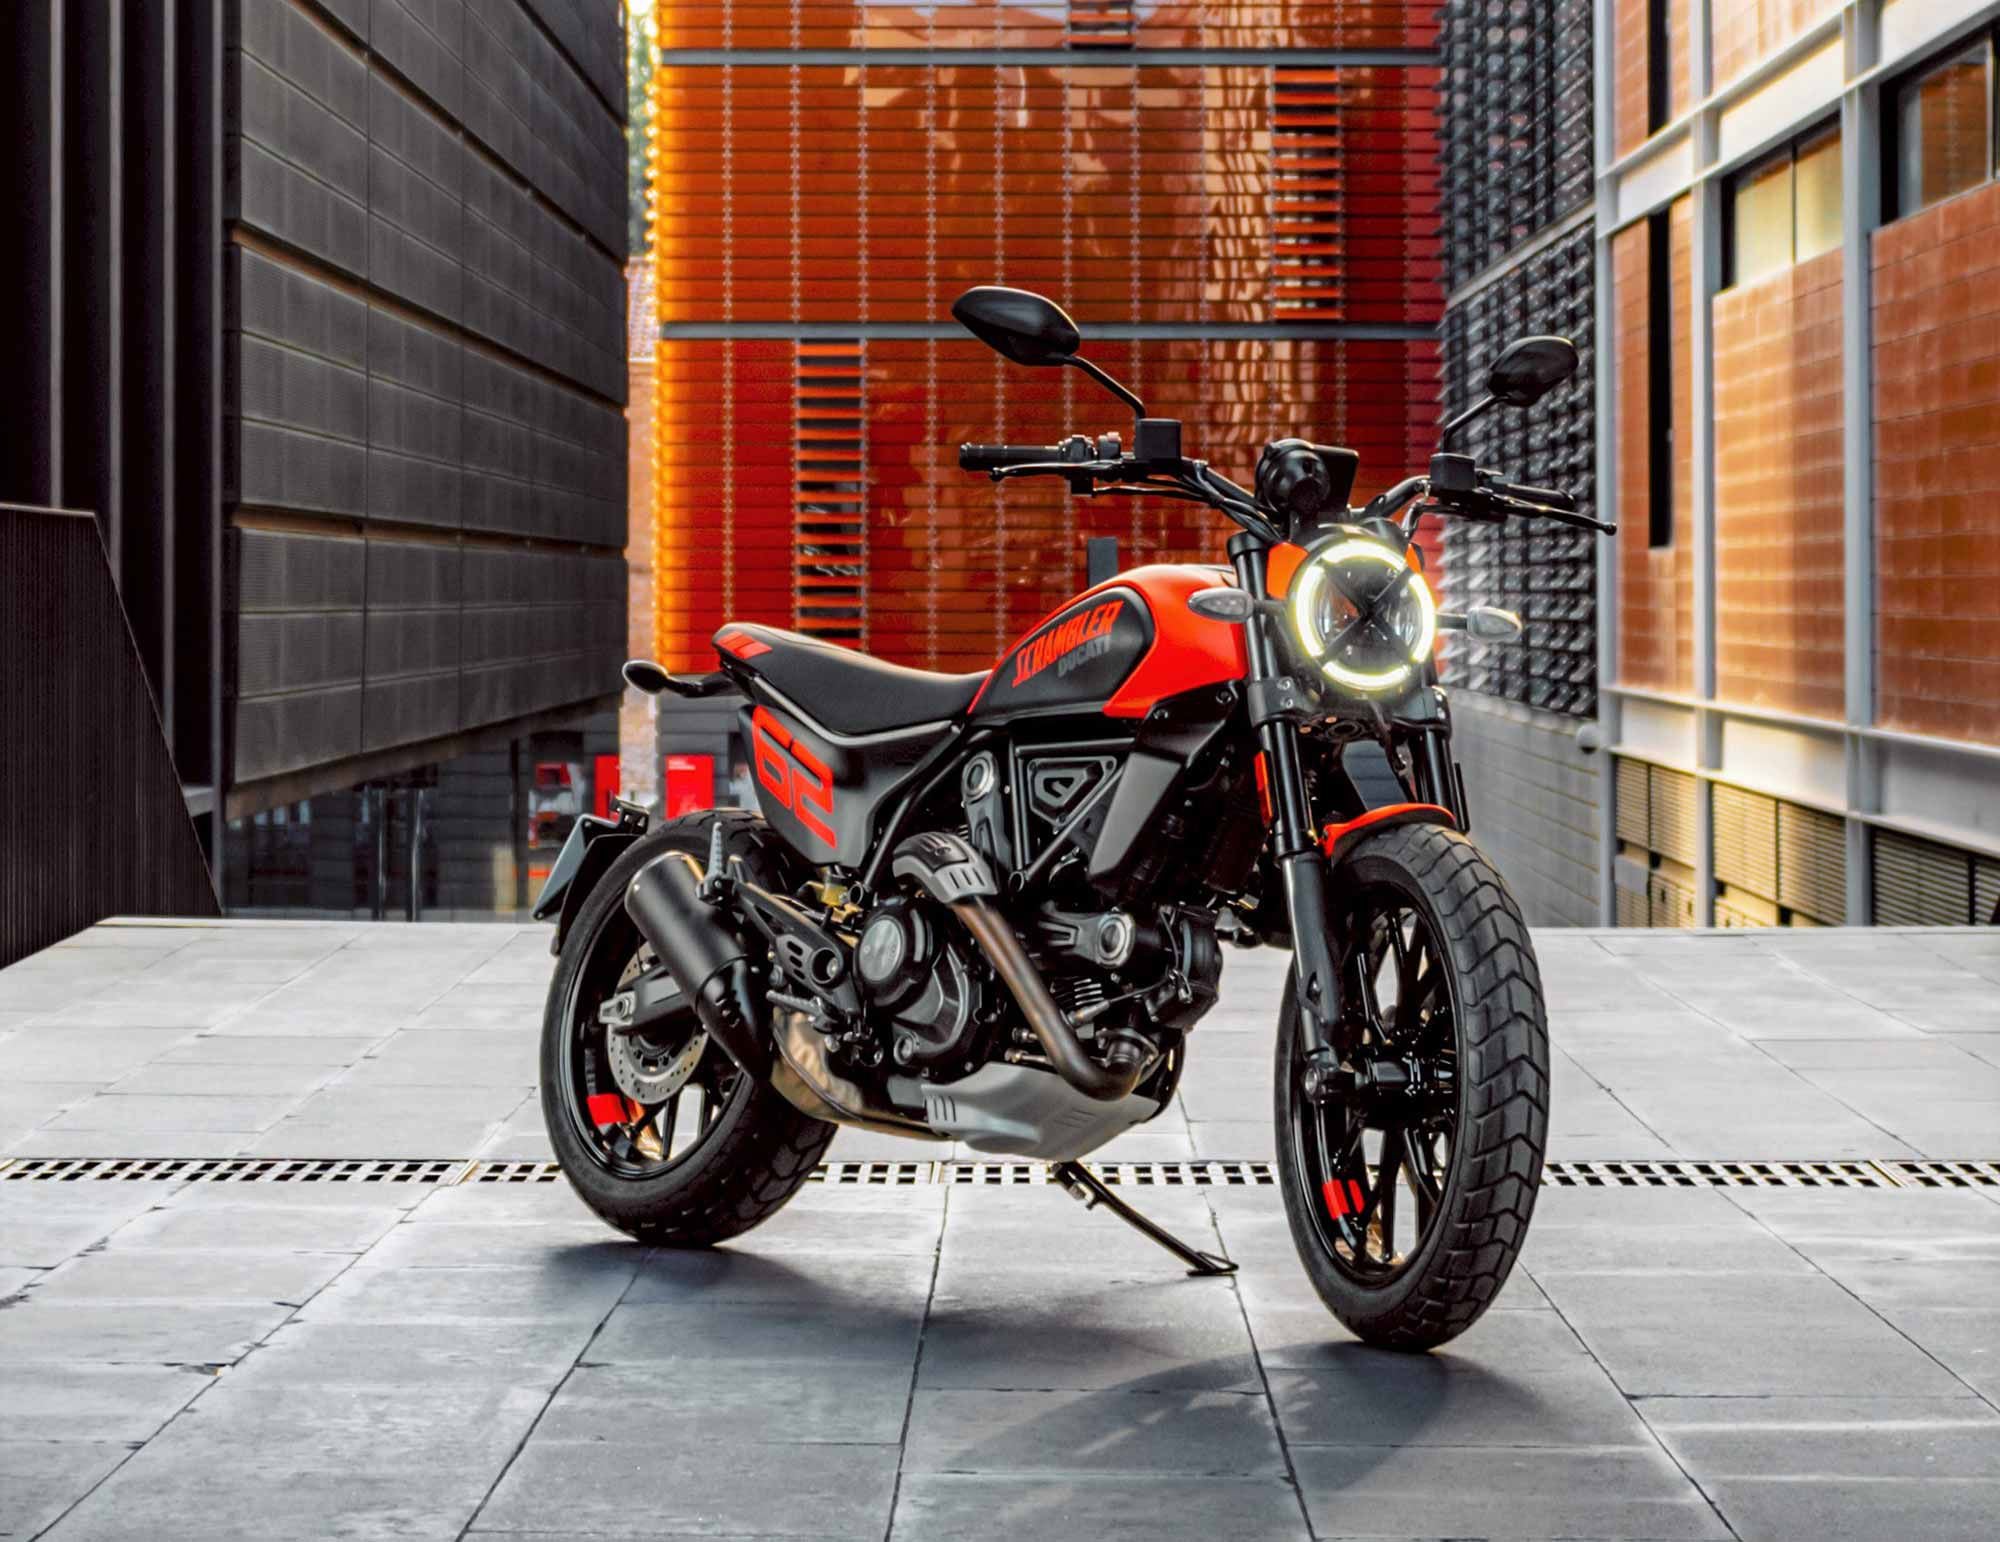 The new Scrambler Full Throttle goes a bit sportier with a dedicated saddle and livery. Red tags on alloy wheels, a homologated Termignoni silencer, Ducati Performance LED indicators, and standard Quick Shift complete the performance vibe.